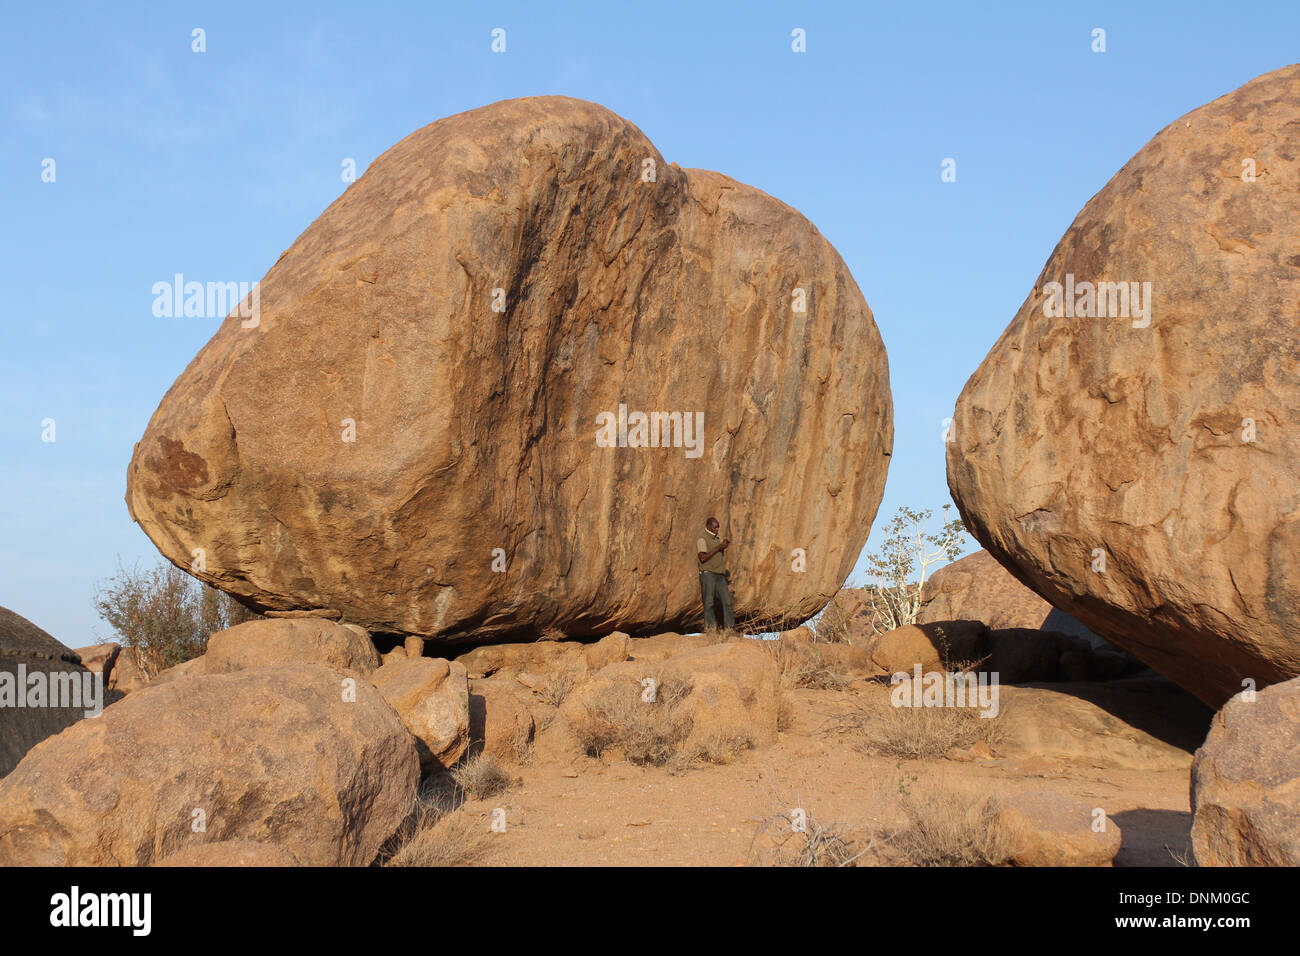 Man standing against a  giant boulder in the Namib Desert,Namibia. Stock Photo